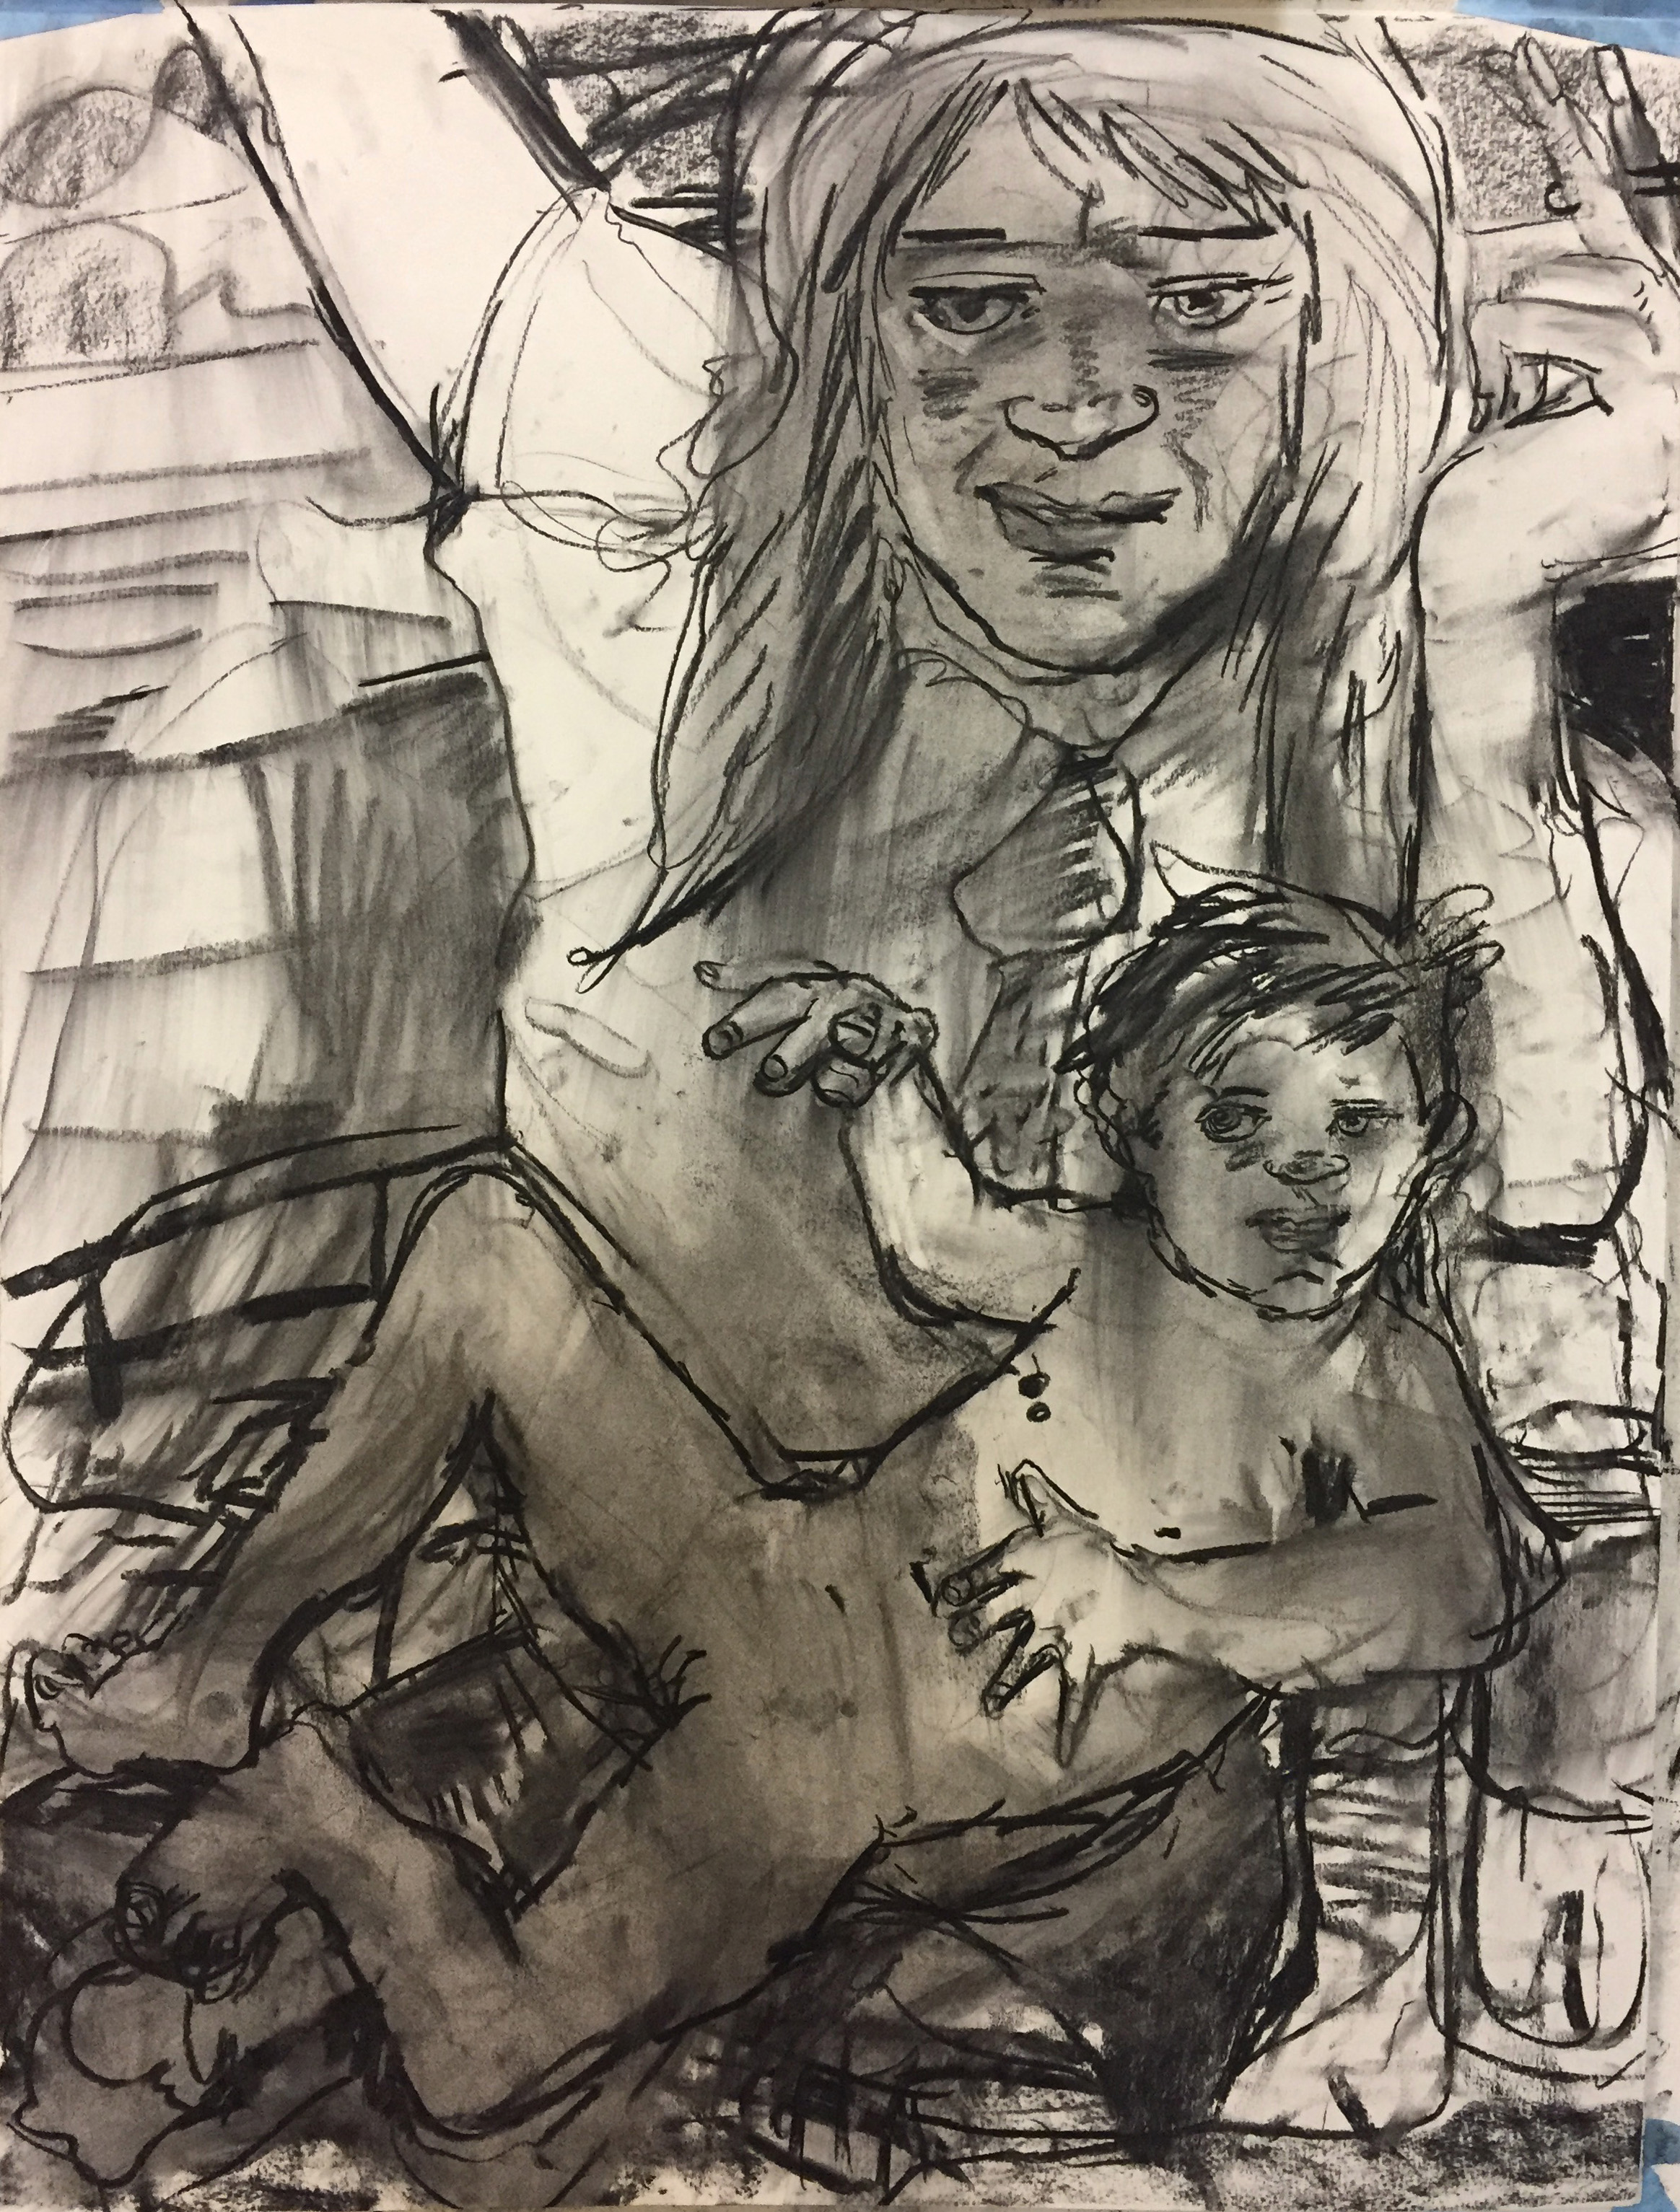 Mamma 18 by 24 inches charcoal on paper 2017.jpg